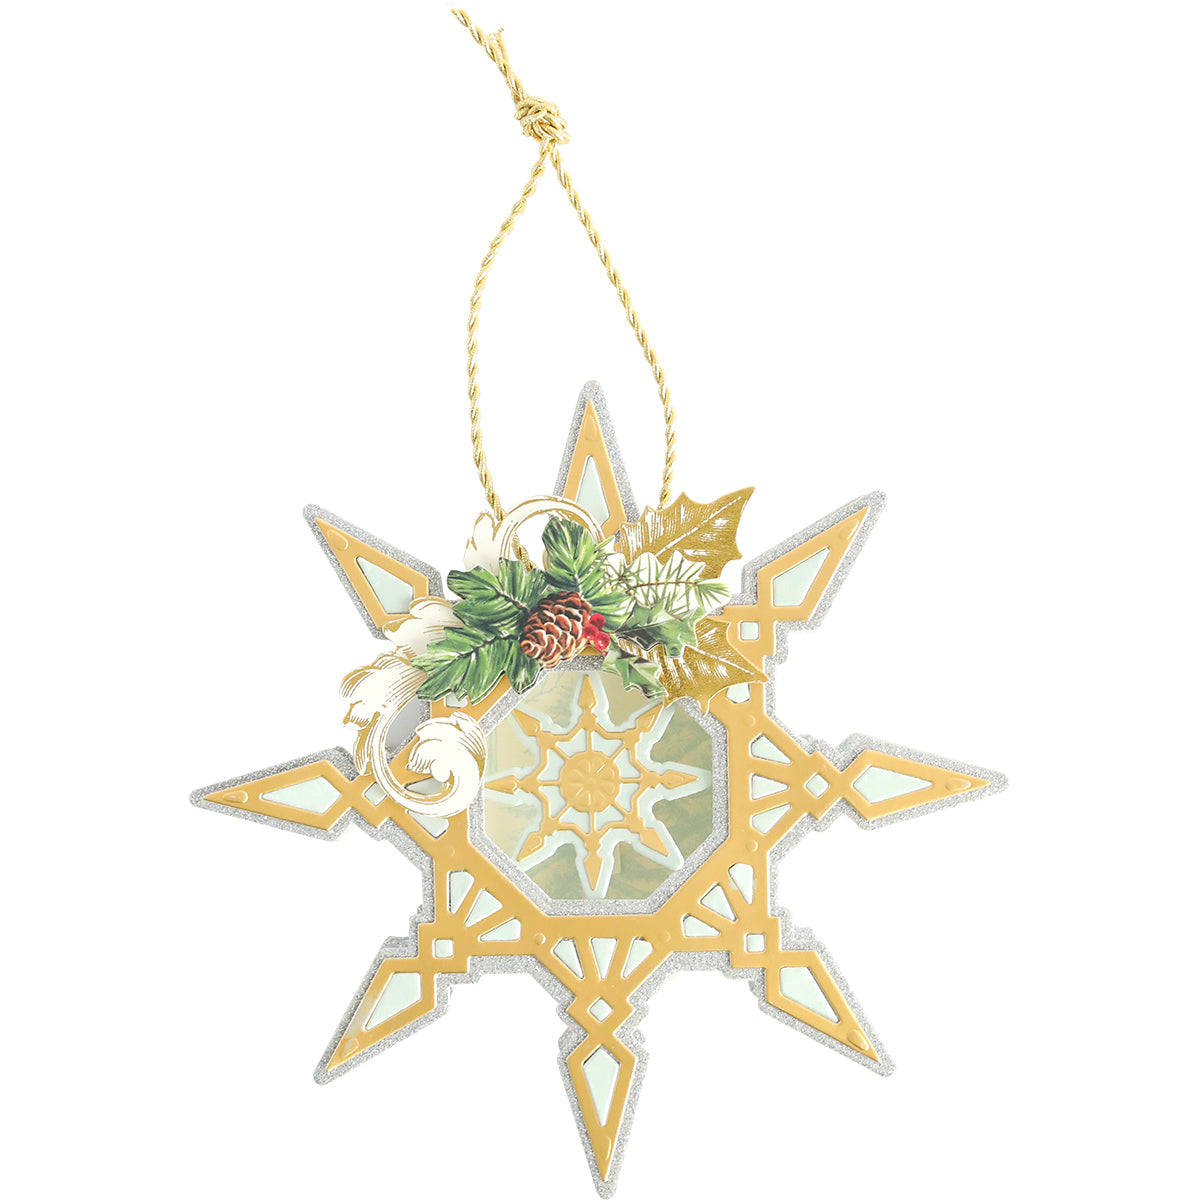 An Anna Griffin Heirloom Ornaments Class Materials and Dies ornament embellished with a chain.